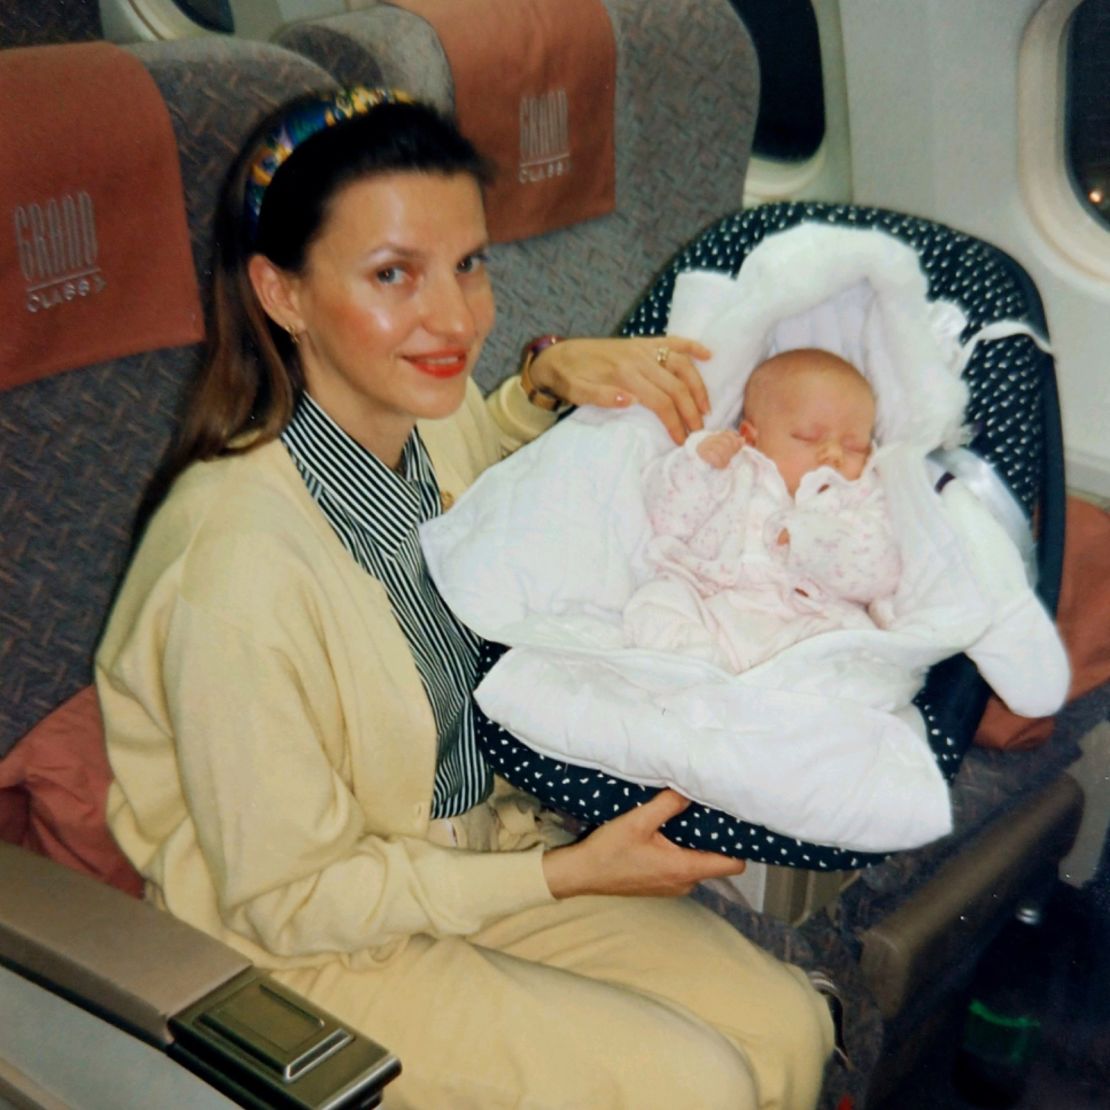 Fila's parents say she was always comfortable on airplanes, even as a baby.